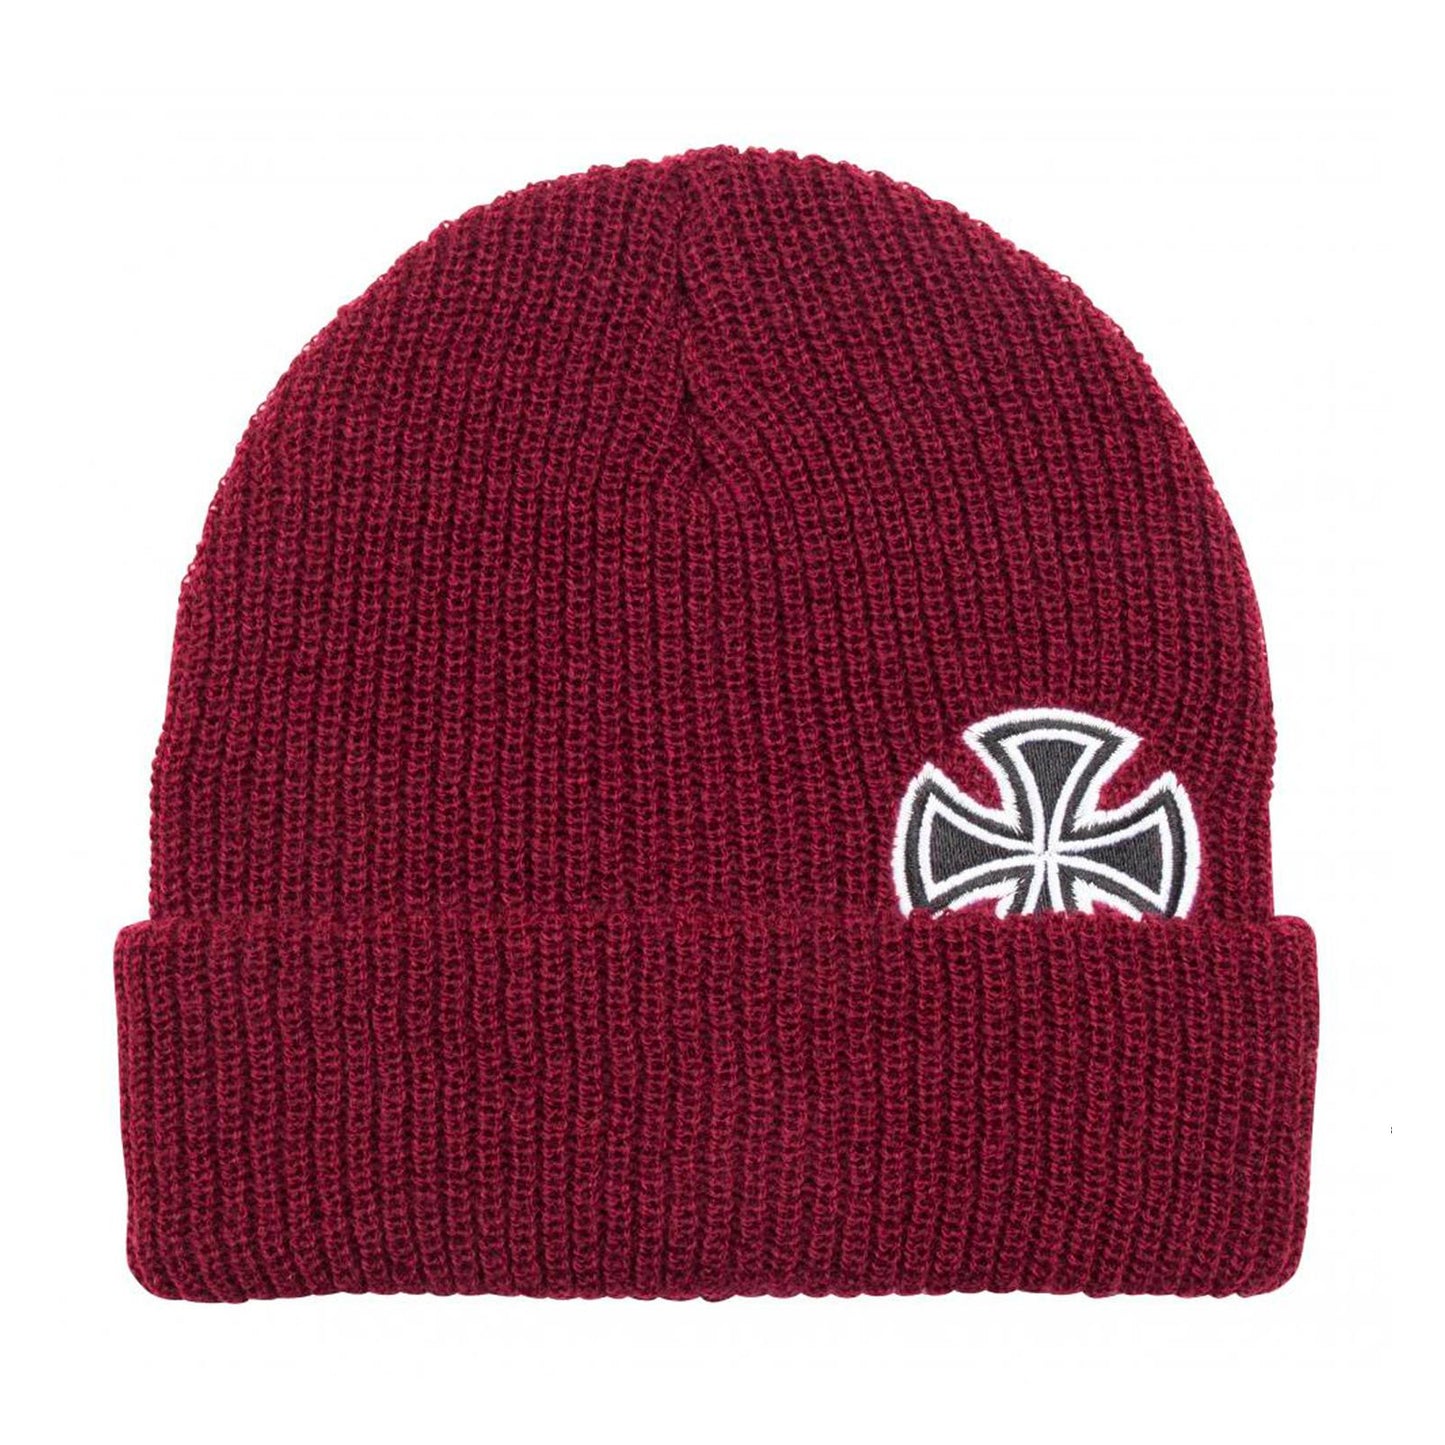 Independent Solo Cross Beanie - Oxblood - Prime Delux Store